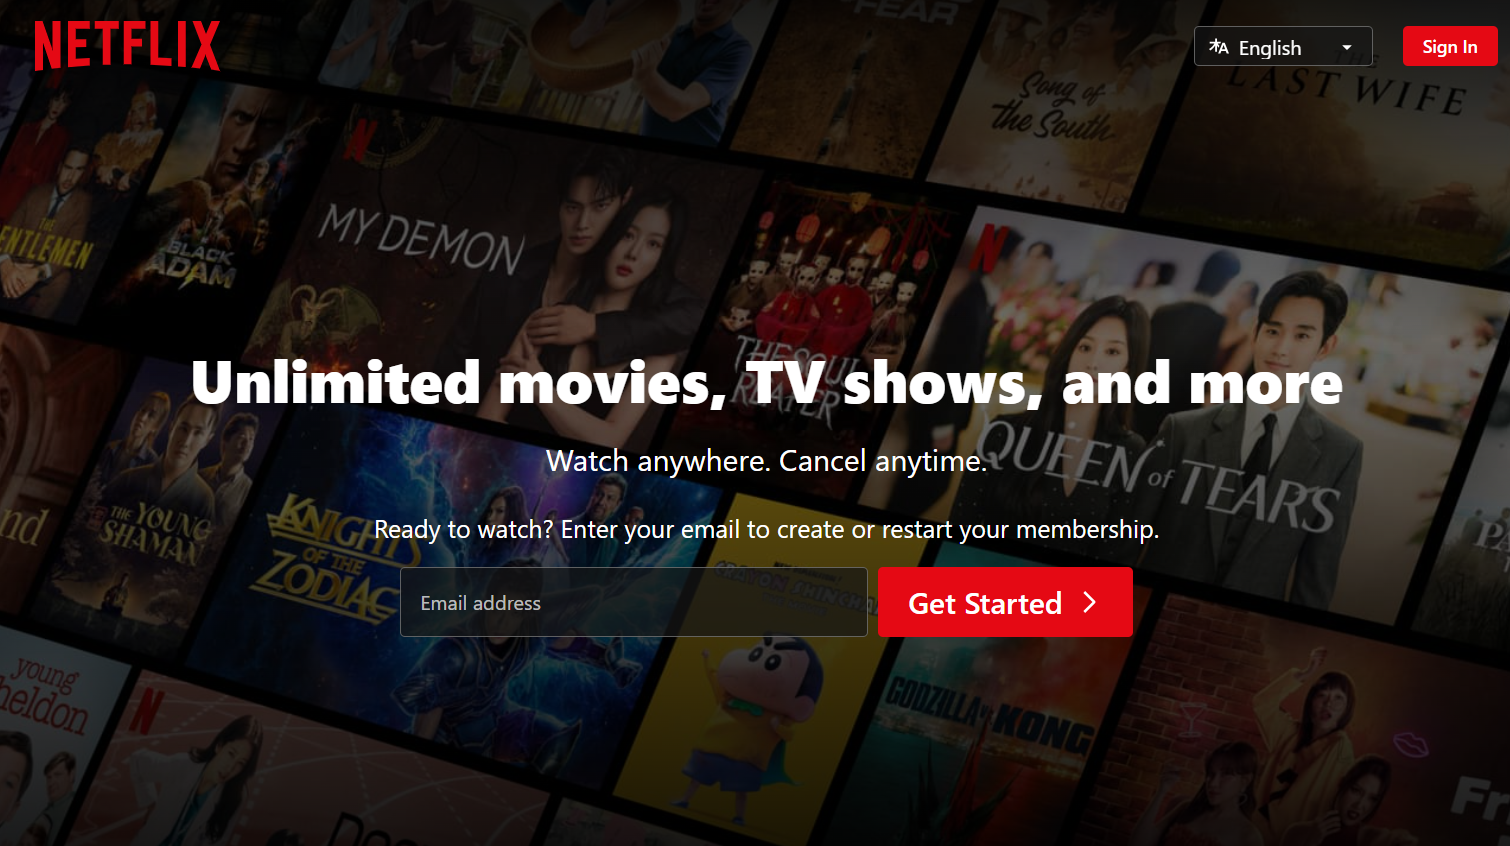 Netflix uses AI to suggest what you might like to watch